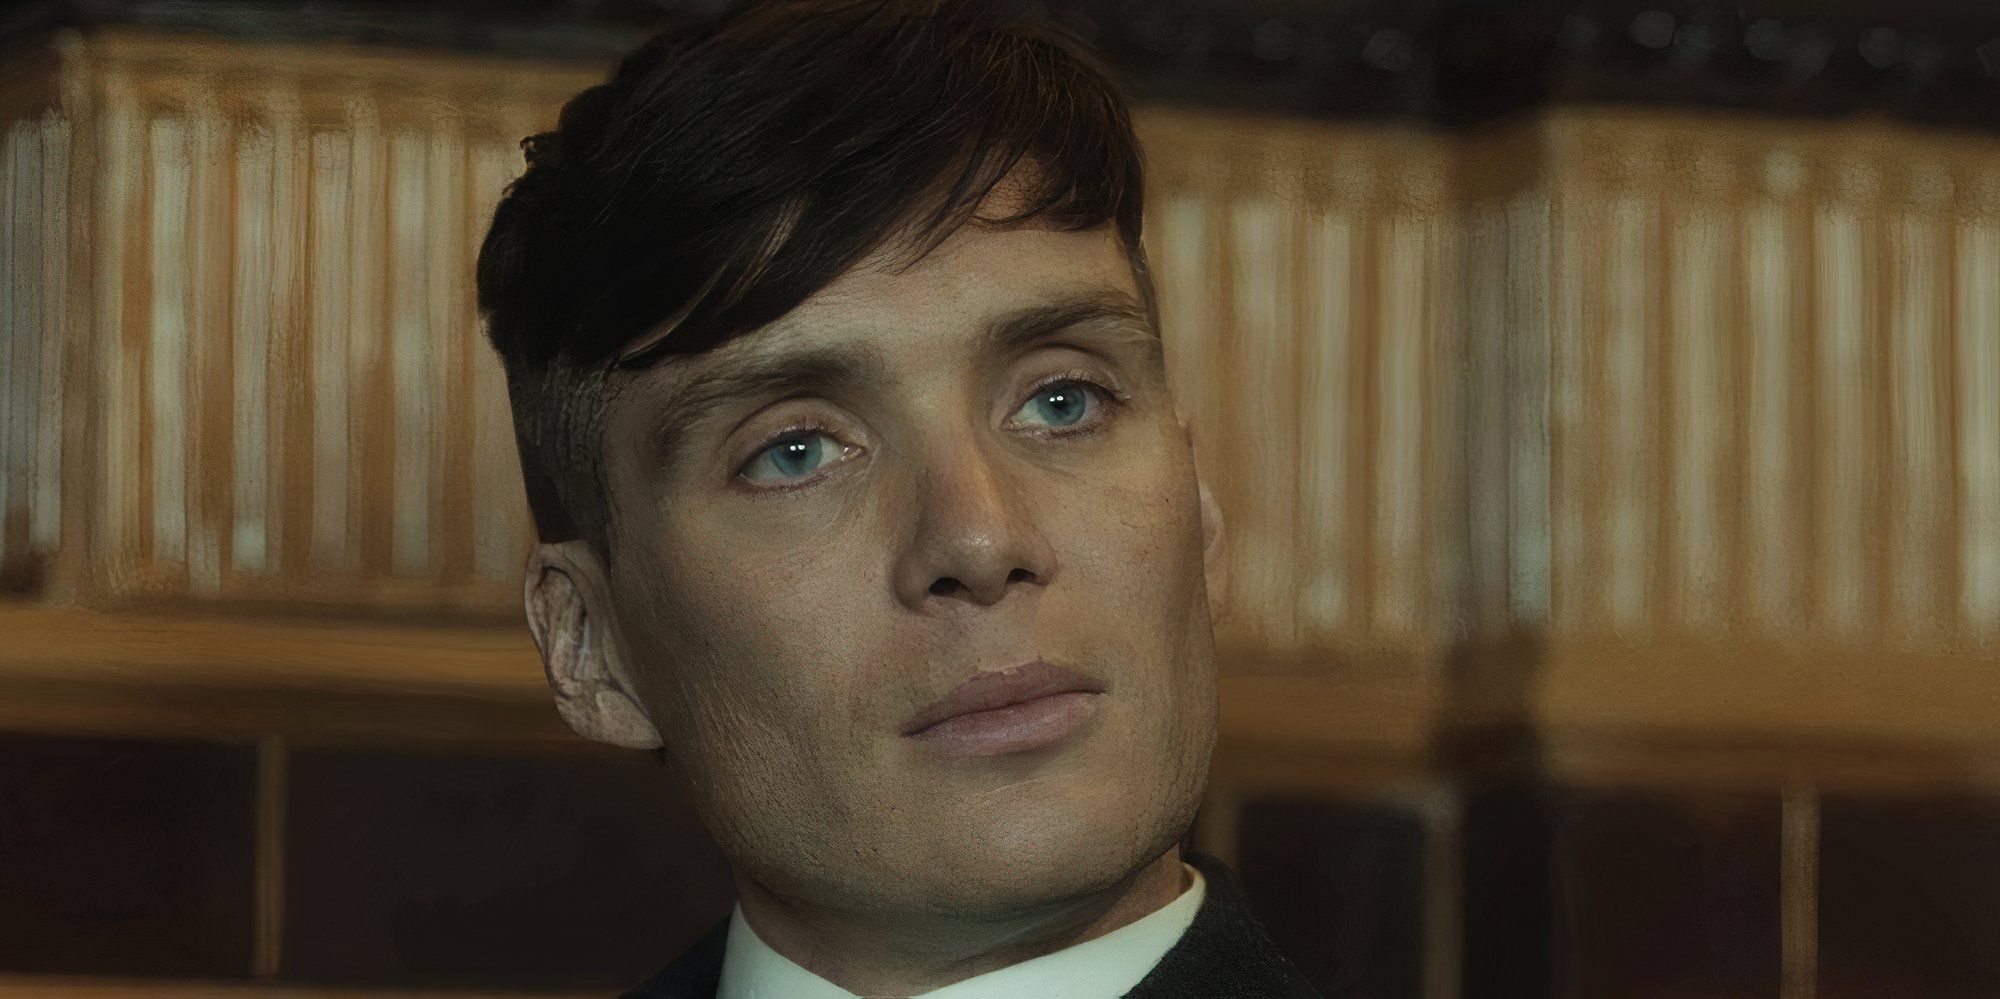 Cillian Murphy as Tommy Shelby with a serious expression in Peaky Blinders.